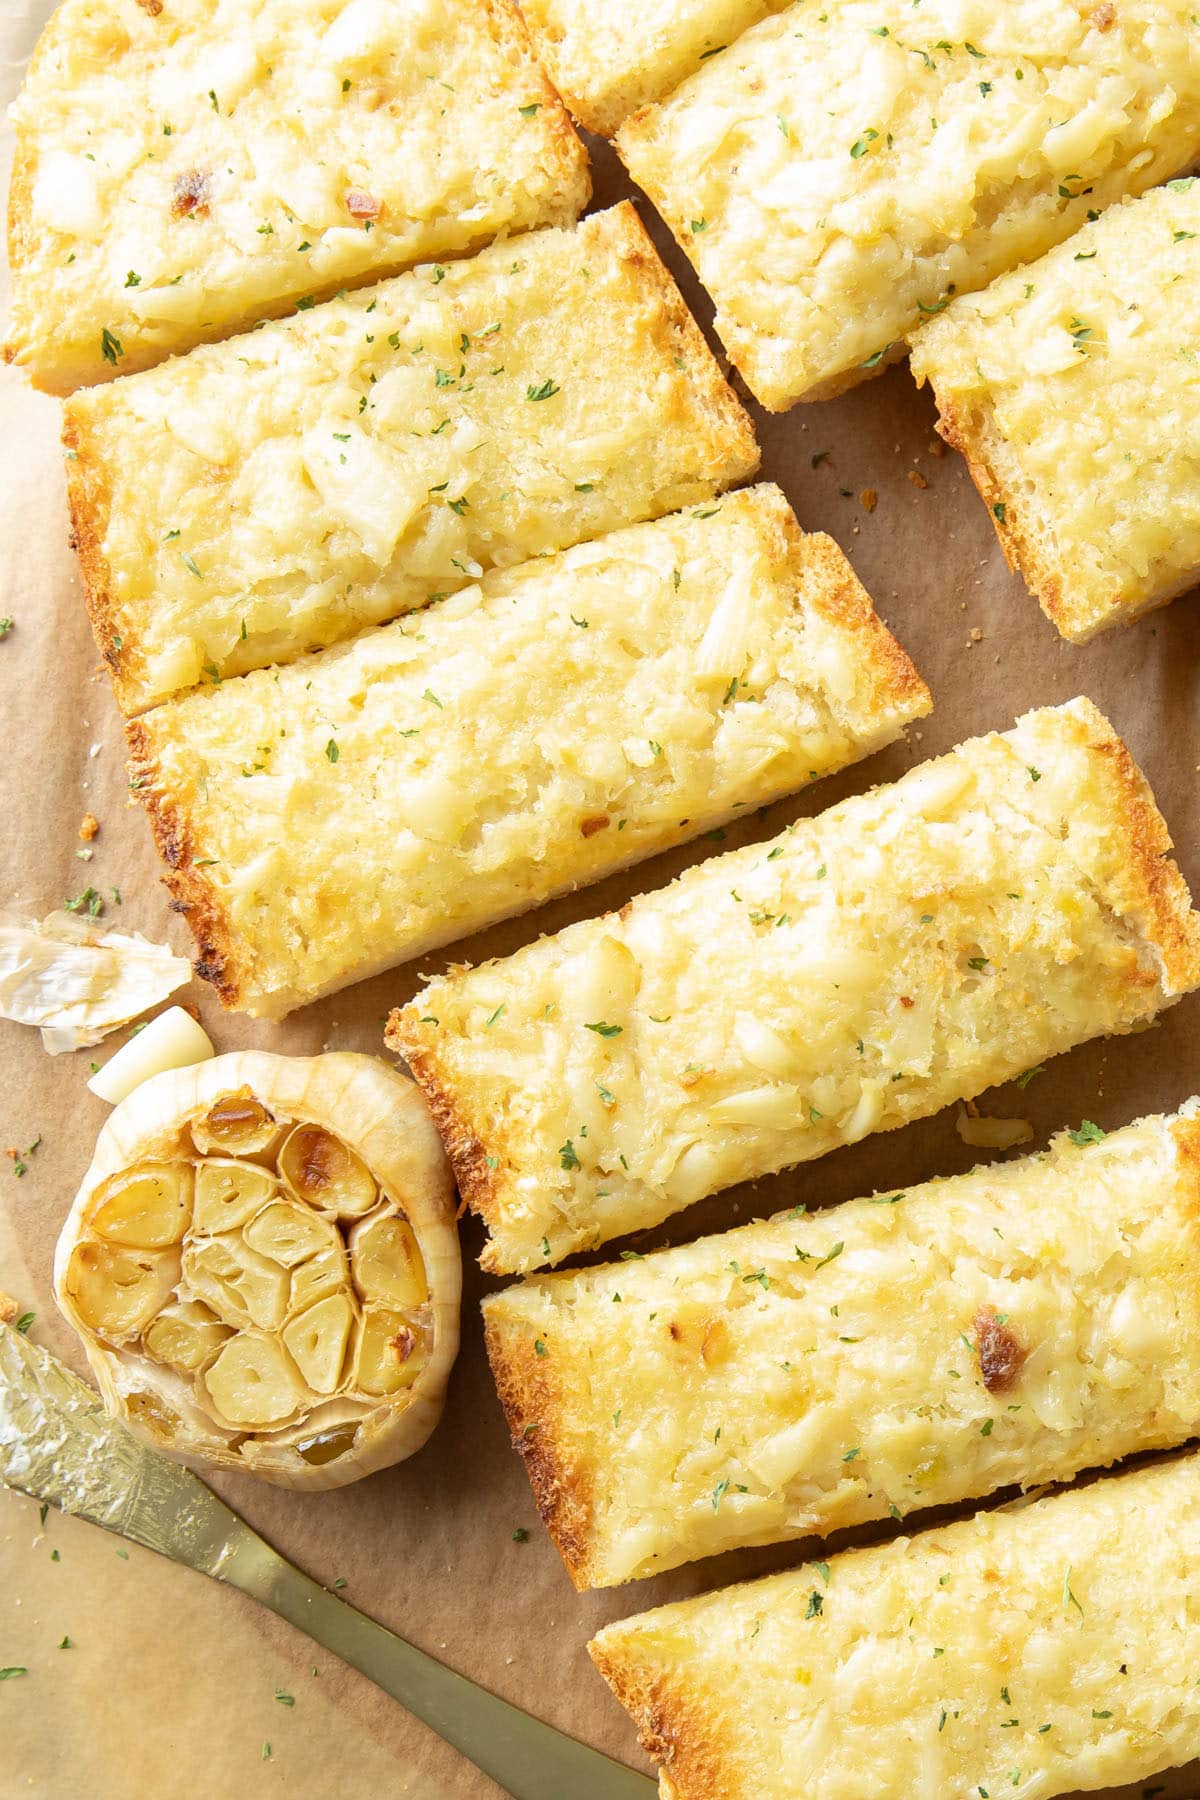 Slices of Garlic Bread fanned out on a serving tray with a head of roasted garlic and a spreading knife